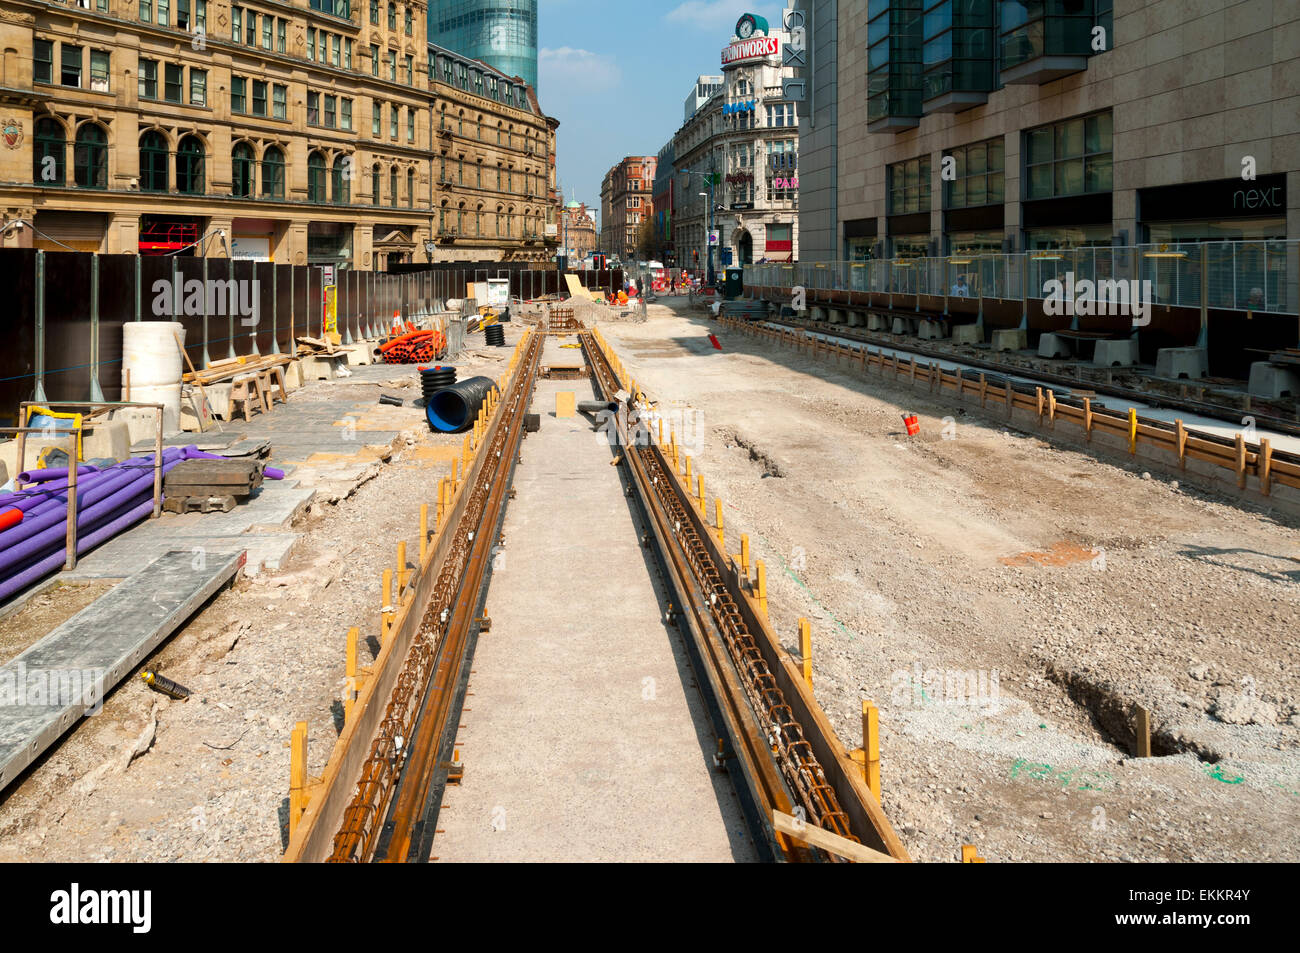 Tram tracks at the site of the future Metrolink tram stop, Exchange Square, Manchester, England, UK. Stock Photo